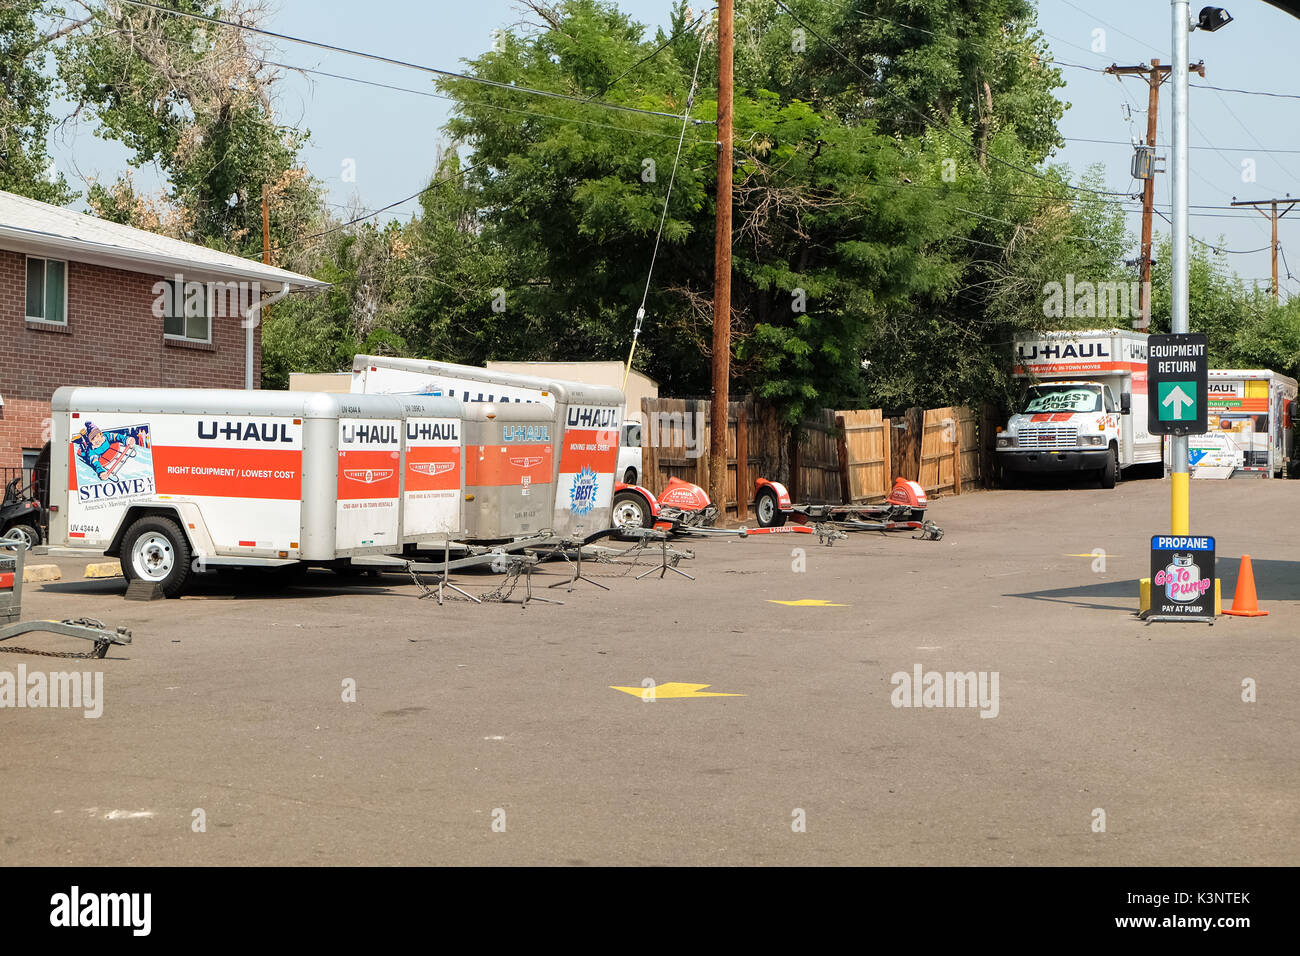 Denver, Colorado, USA - August 7,2017: U-Haul trucks parked at rental place. U-Haul truck is a moving equipment and storage rental company. Stock Photo